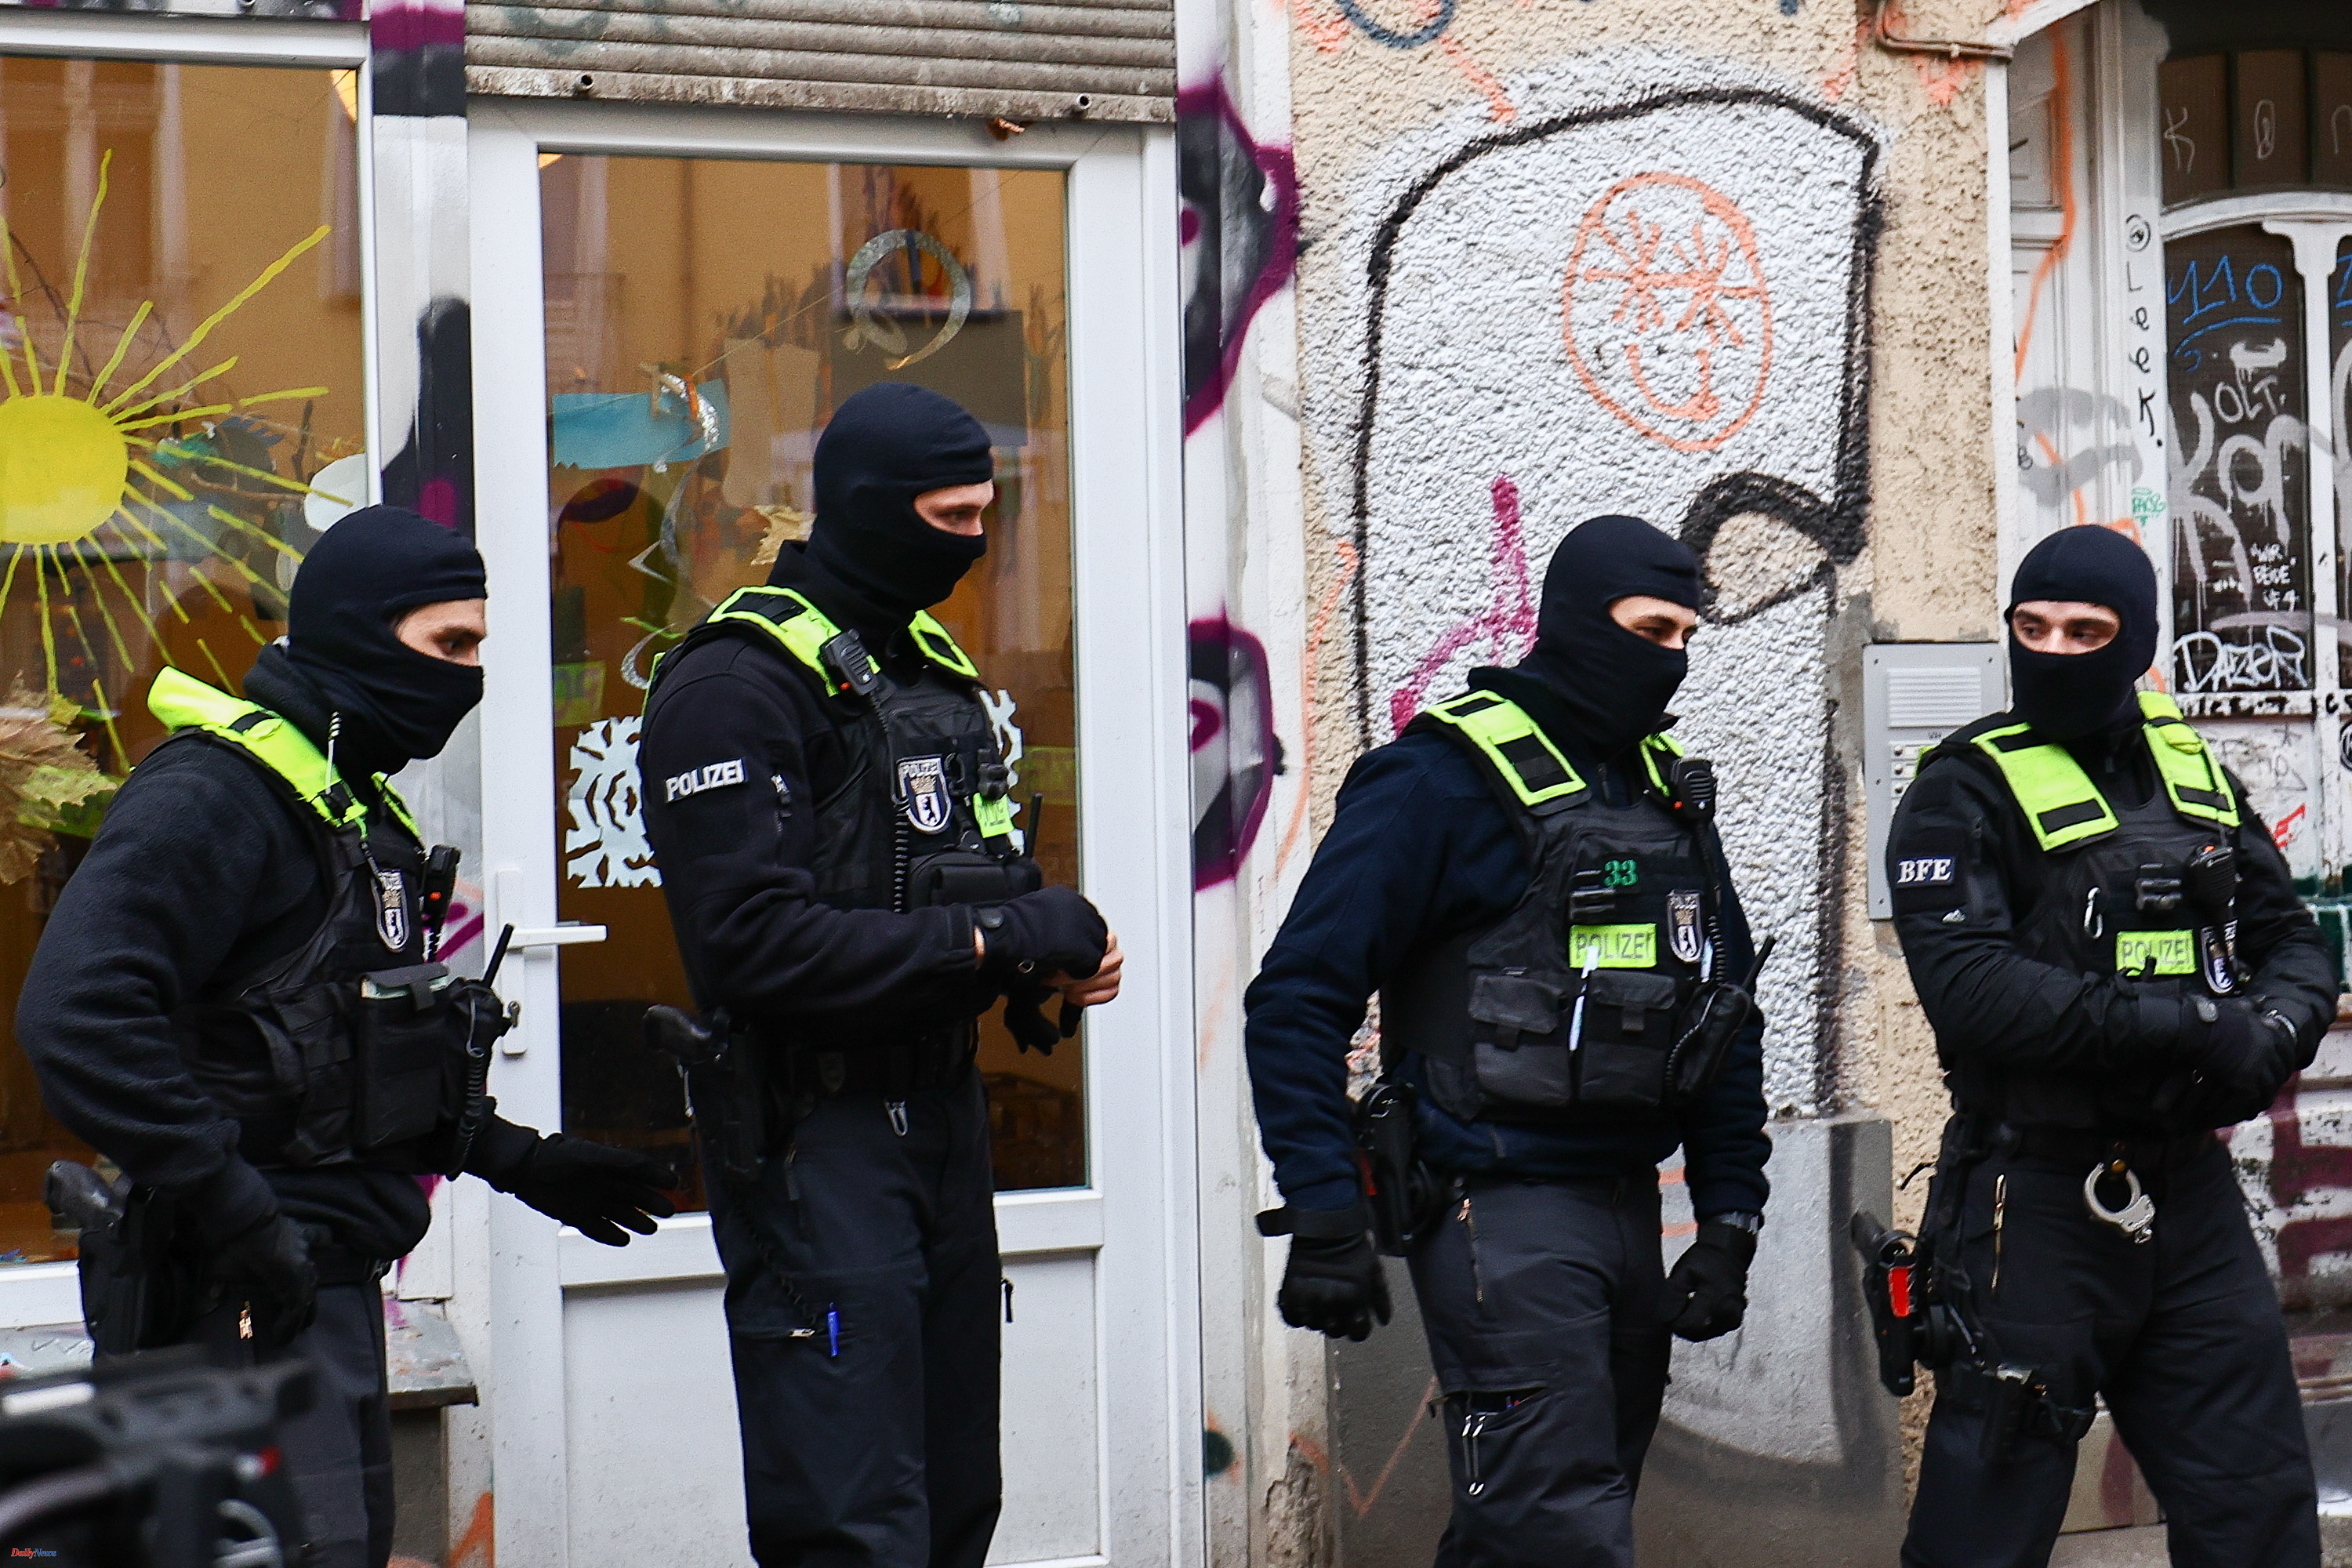 Terrorism Two teenagers arrested in Germany who were planning jihadist attacks against a street market or a synagogue